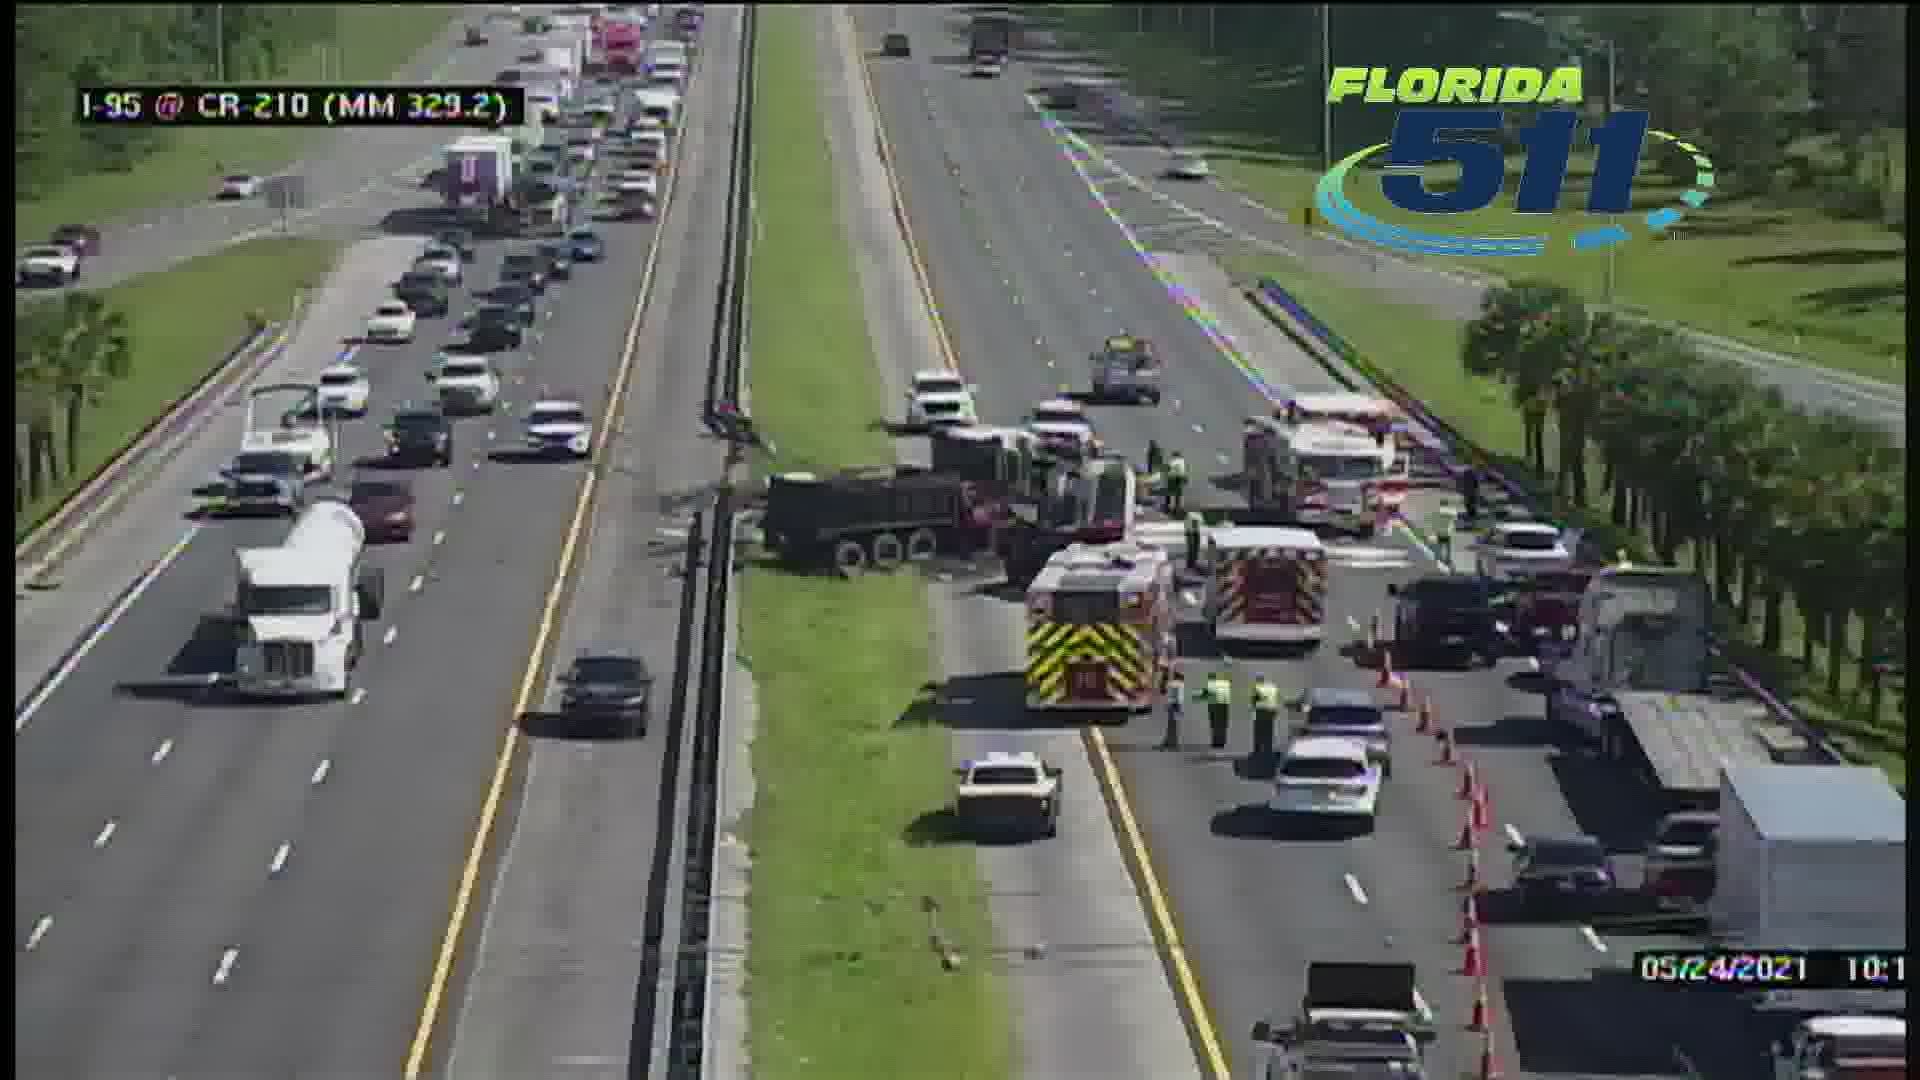 The Florida Highway Patrol was called to the area at 9:58 a.m. One southbound lane is also blocked.